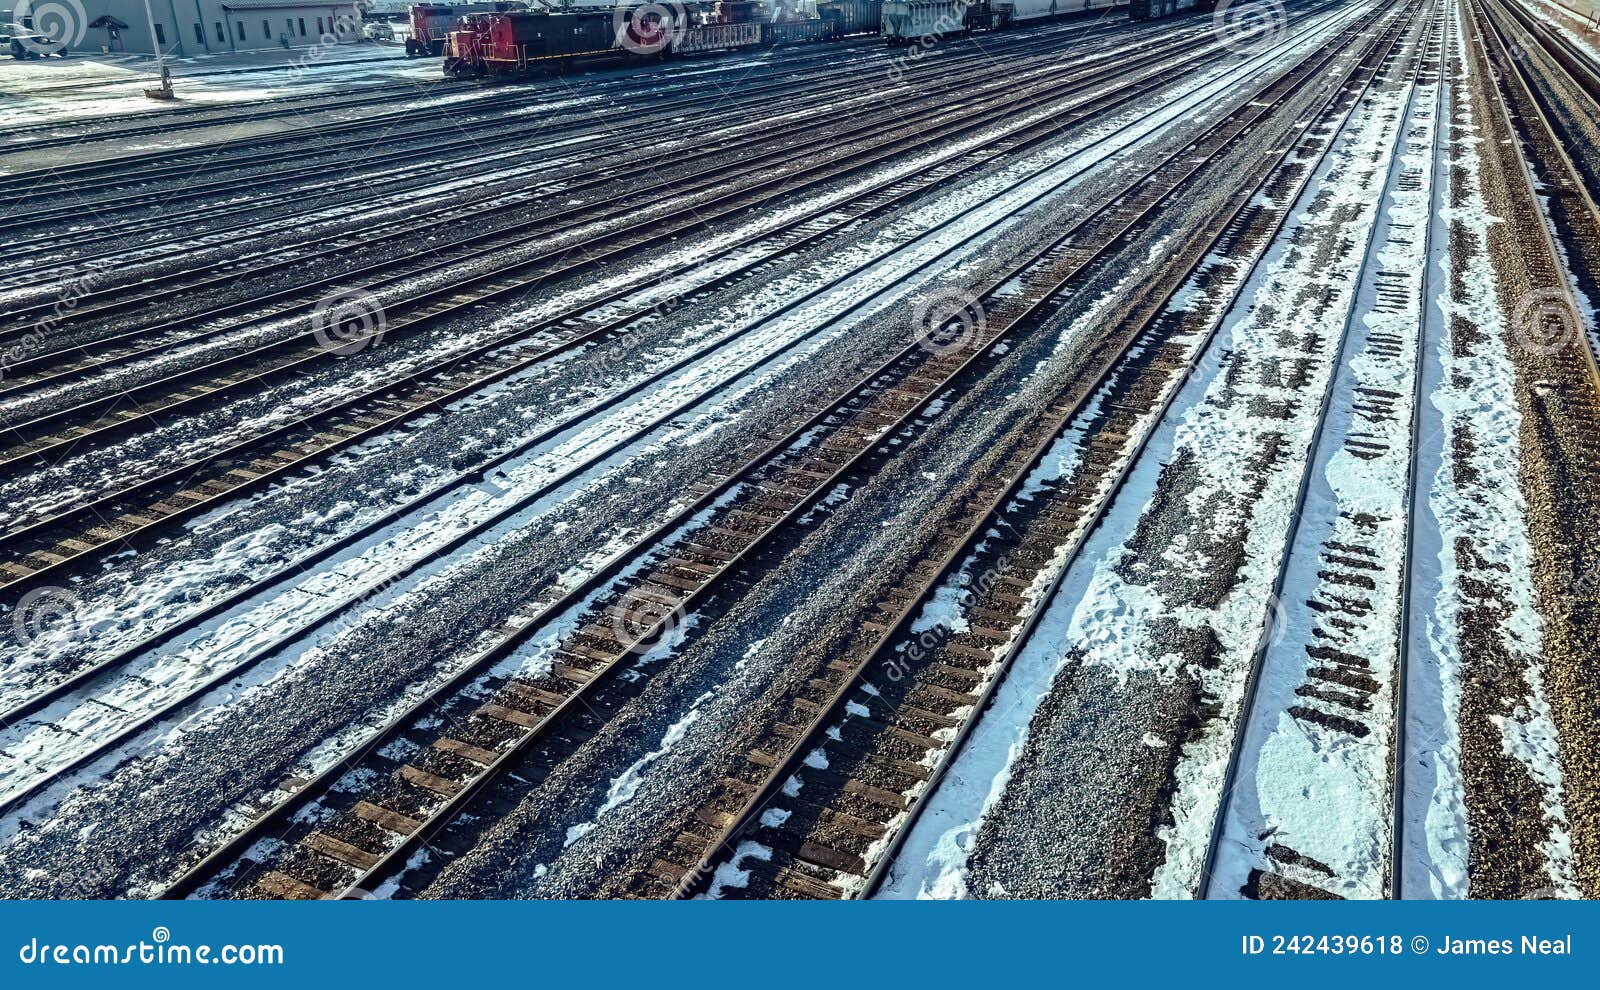 winter railyard with snow during the day